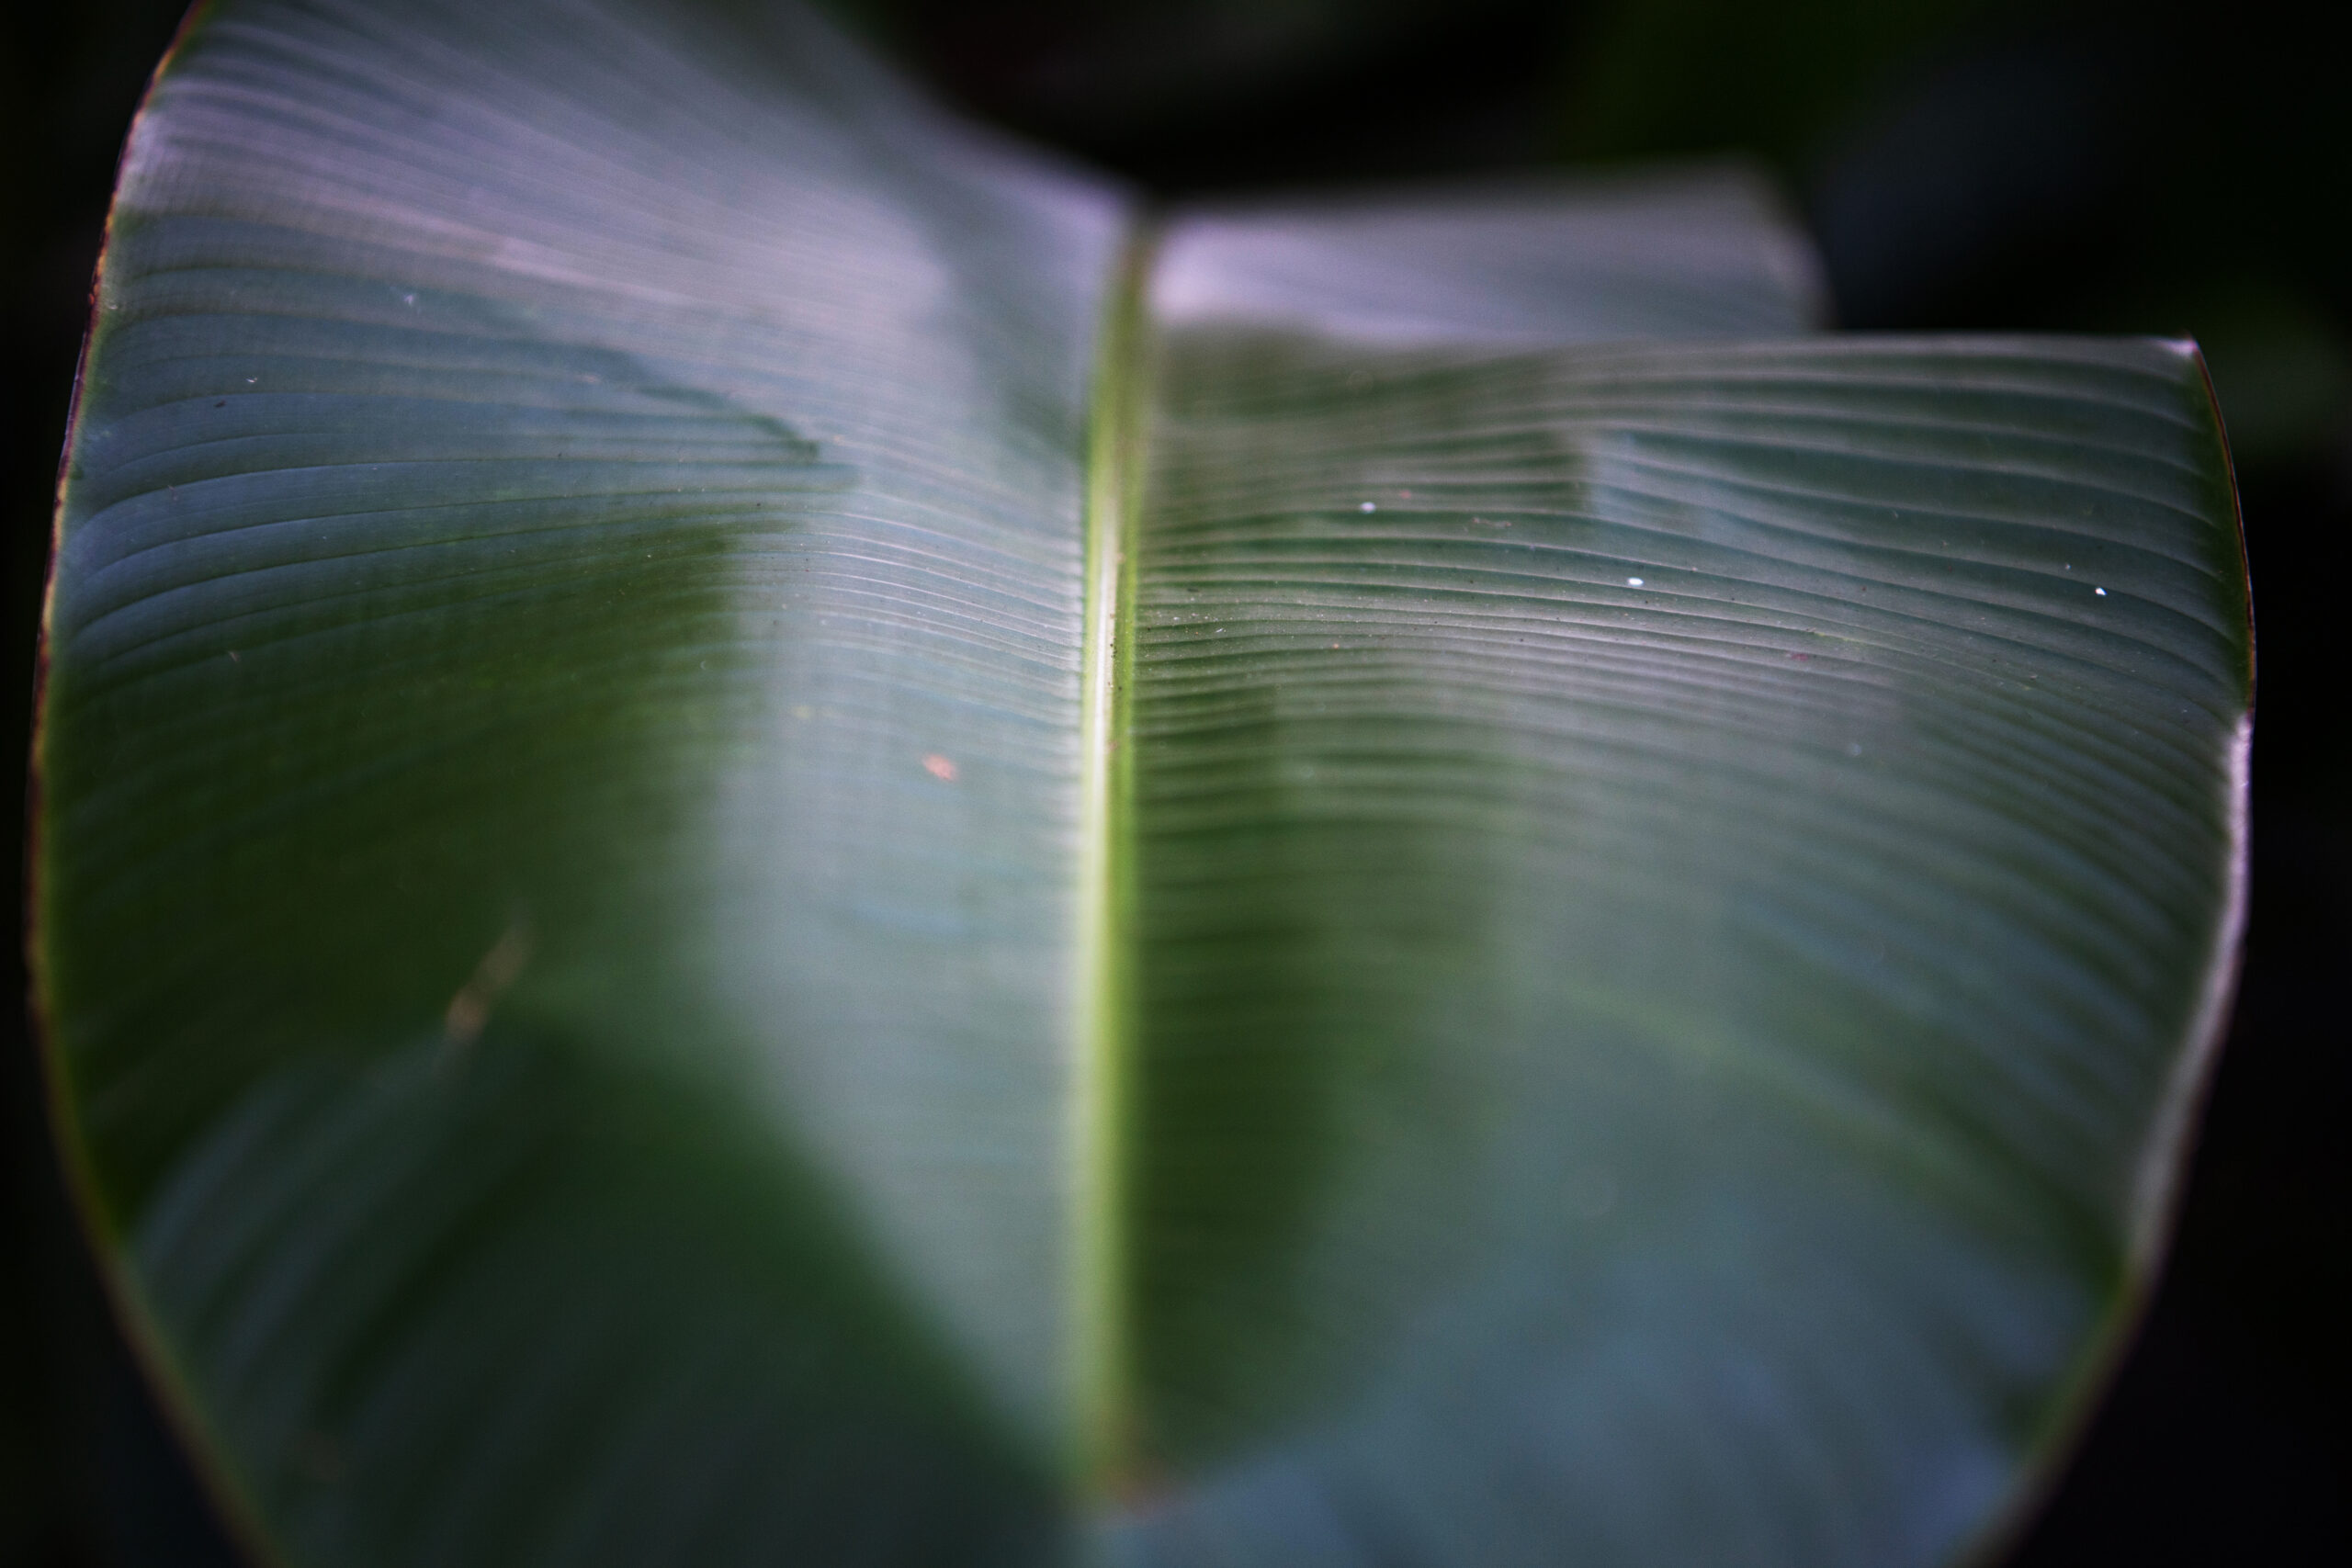 Image shows a leaf used in the preparation of ayahuasca.